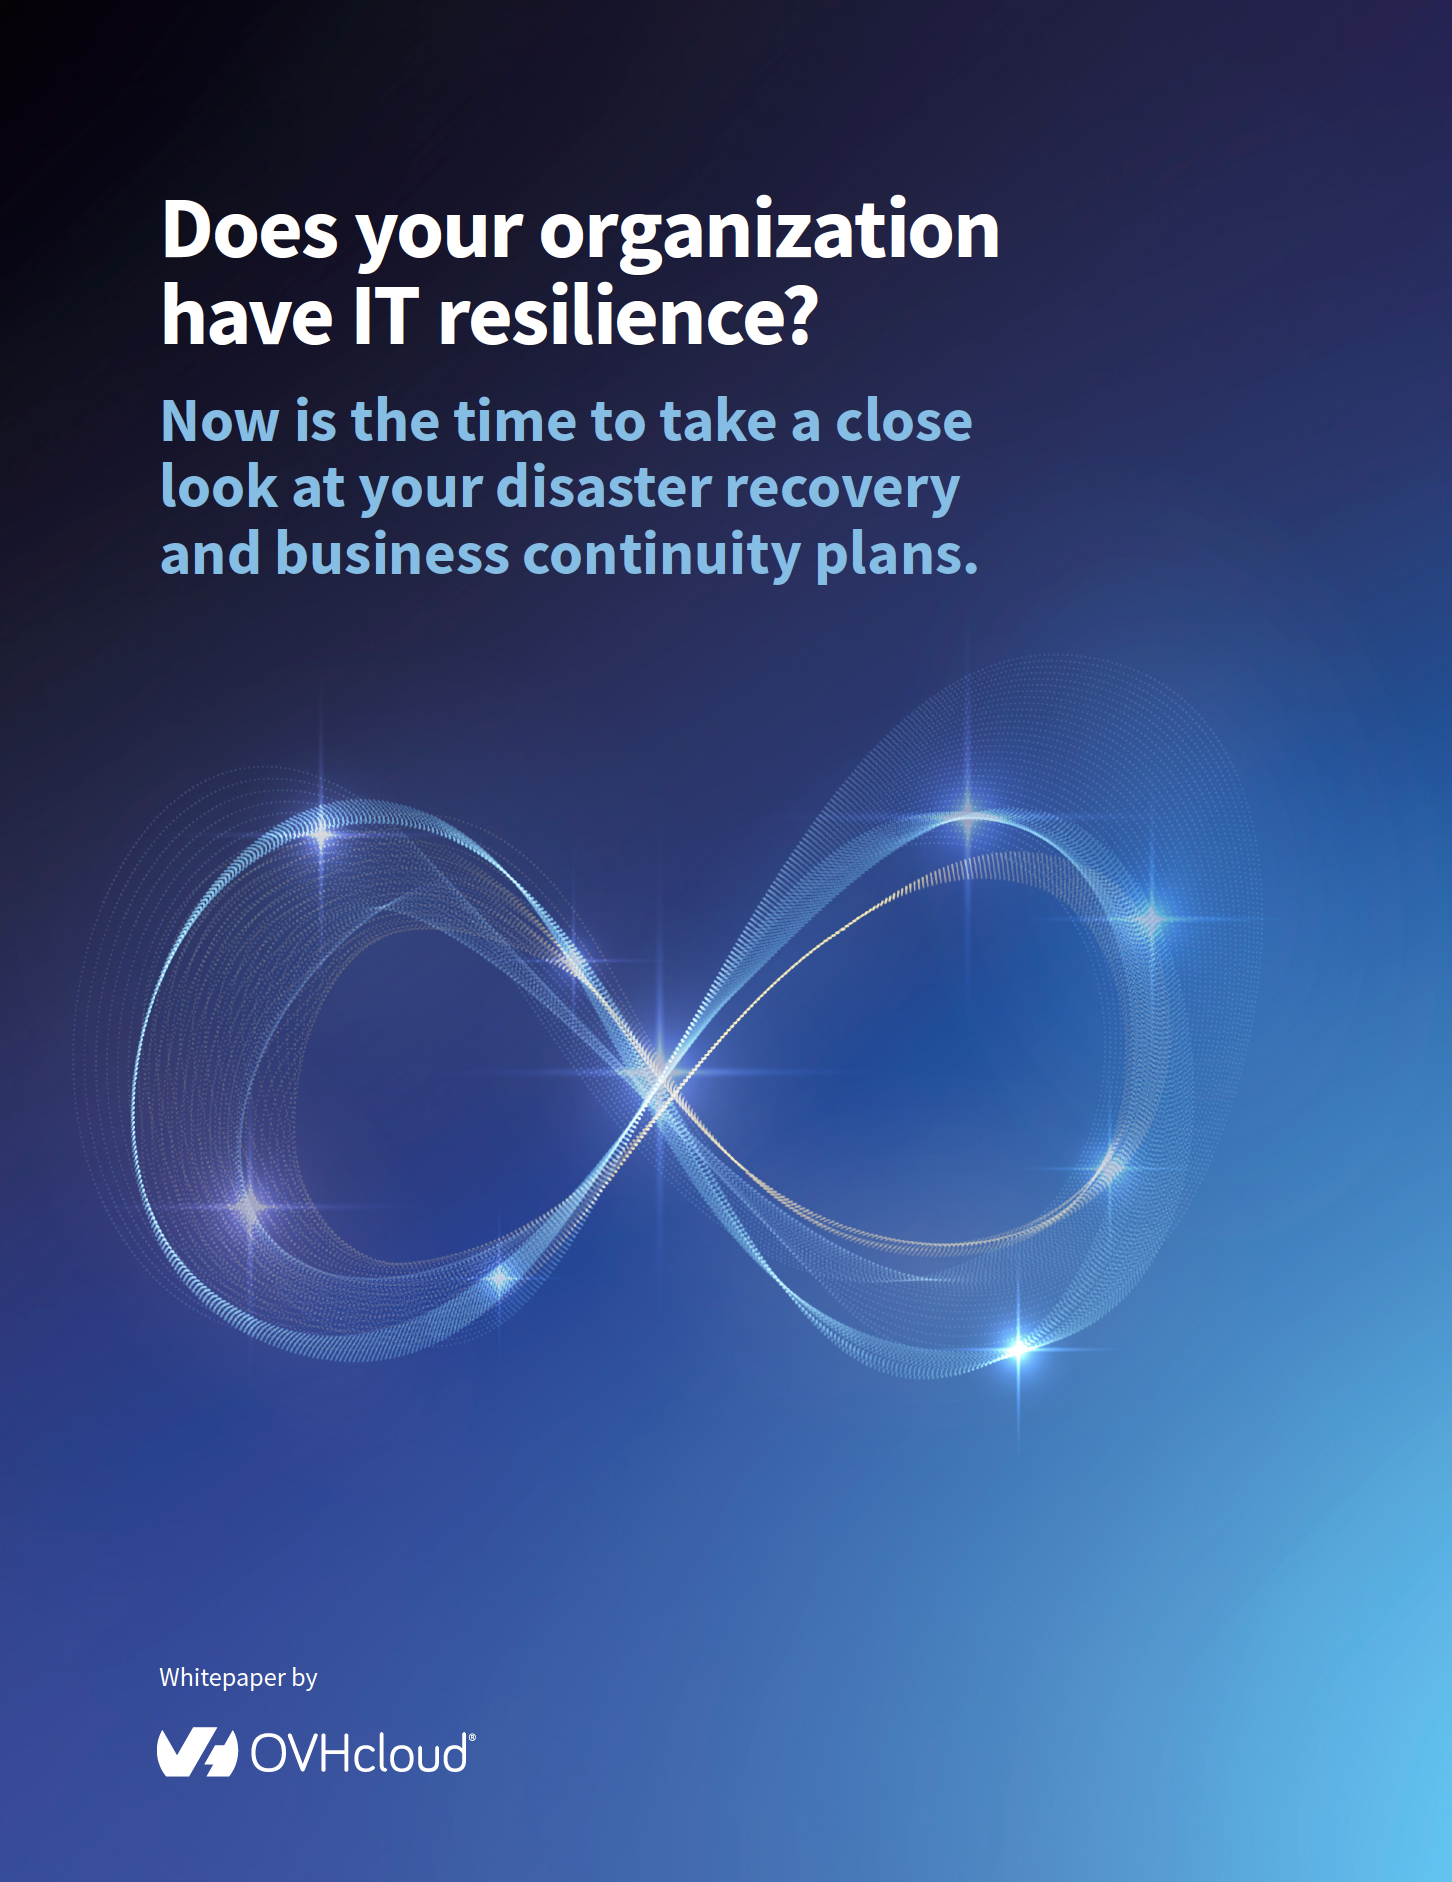 Does your organization have IT resilience?